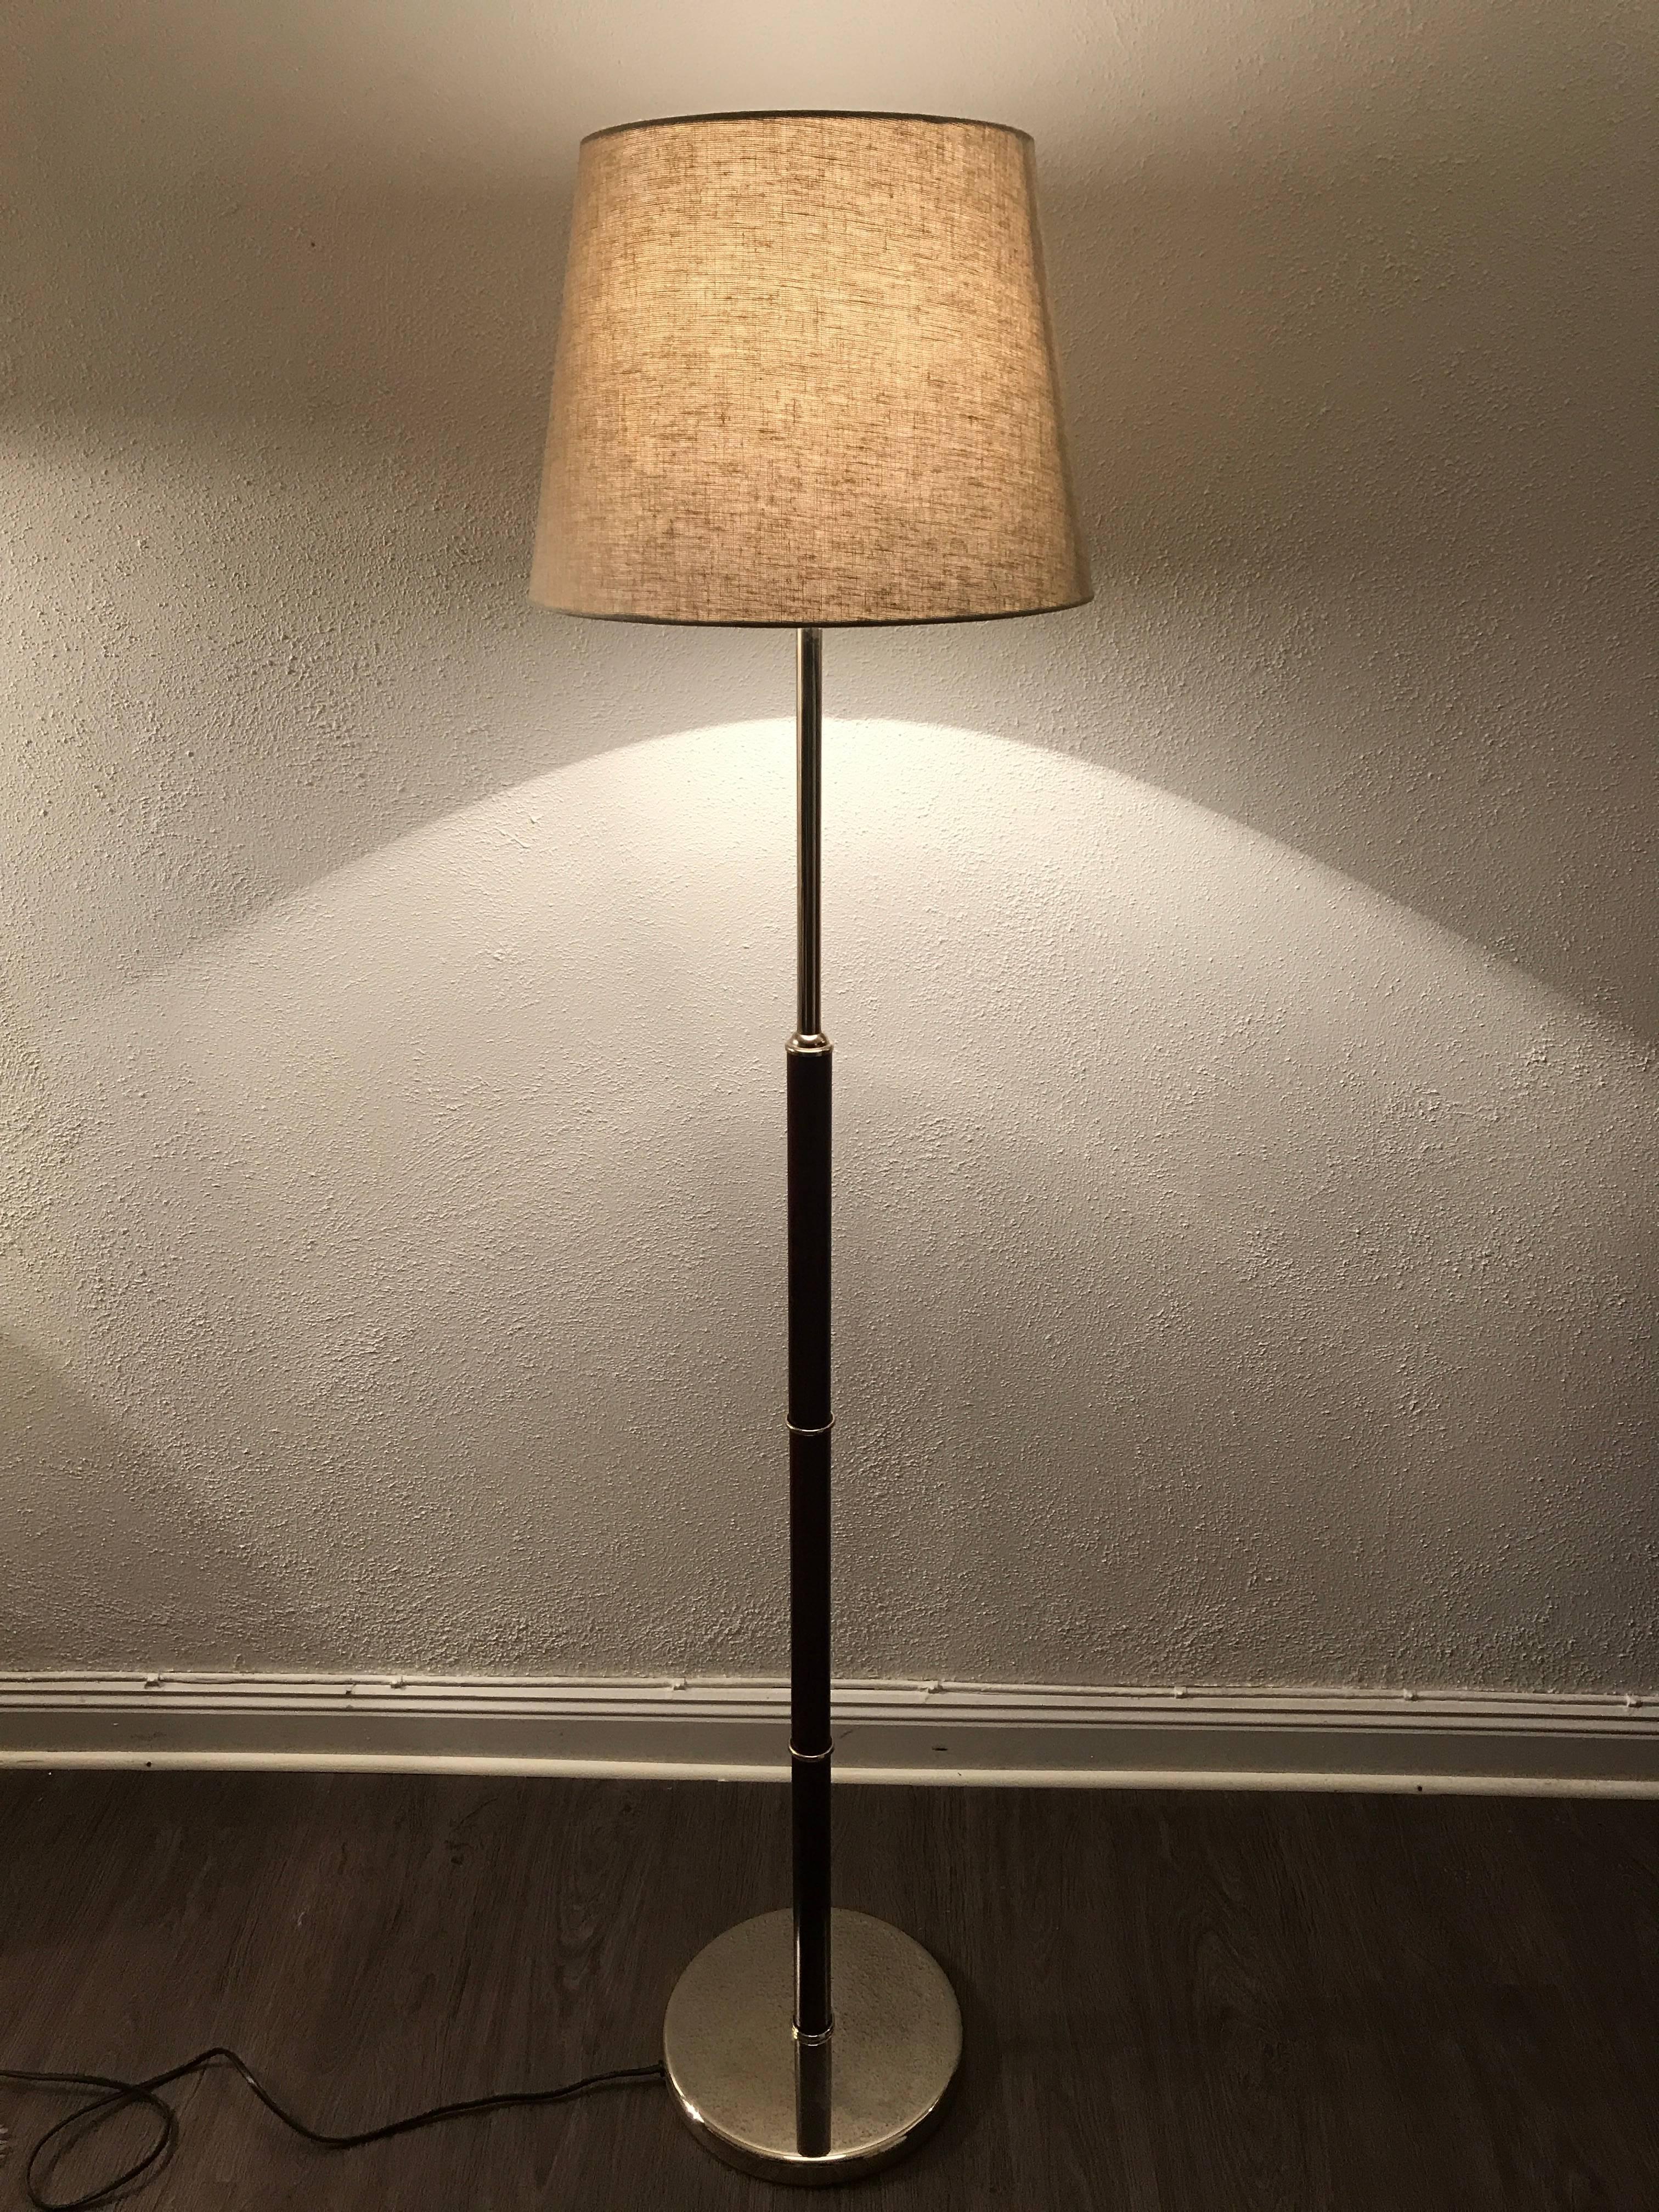 Rare Swedish cherrywood and steel floor lamp made by Belid AB, 1980.
This rare floor lamp was made exclusively for the SAS Radison Hotel in Gothenburg in the early 1980s we have a total of 16 lamps for sale. We have replaced the original shades due